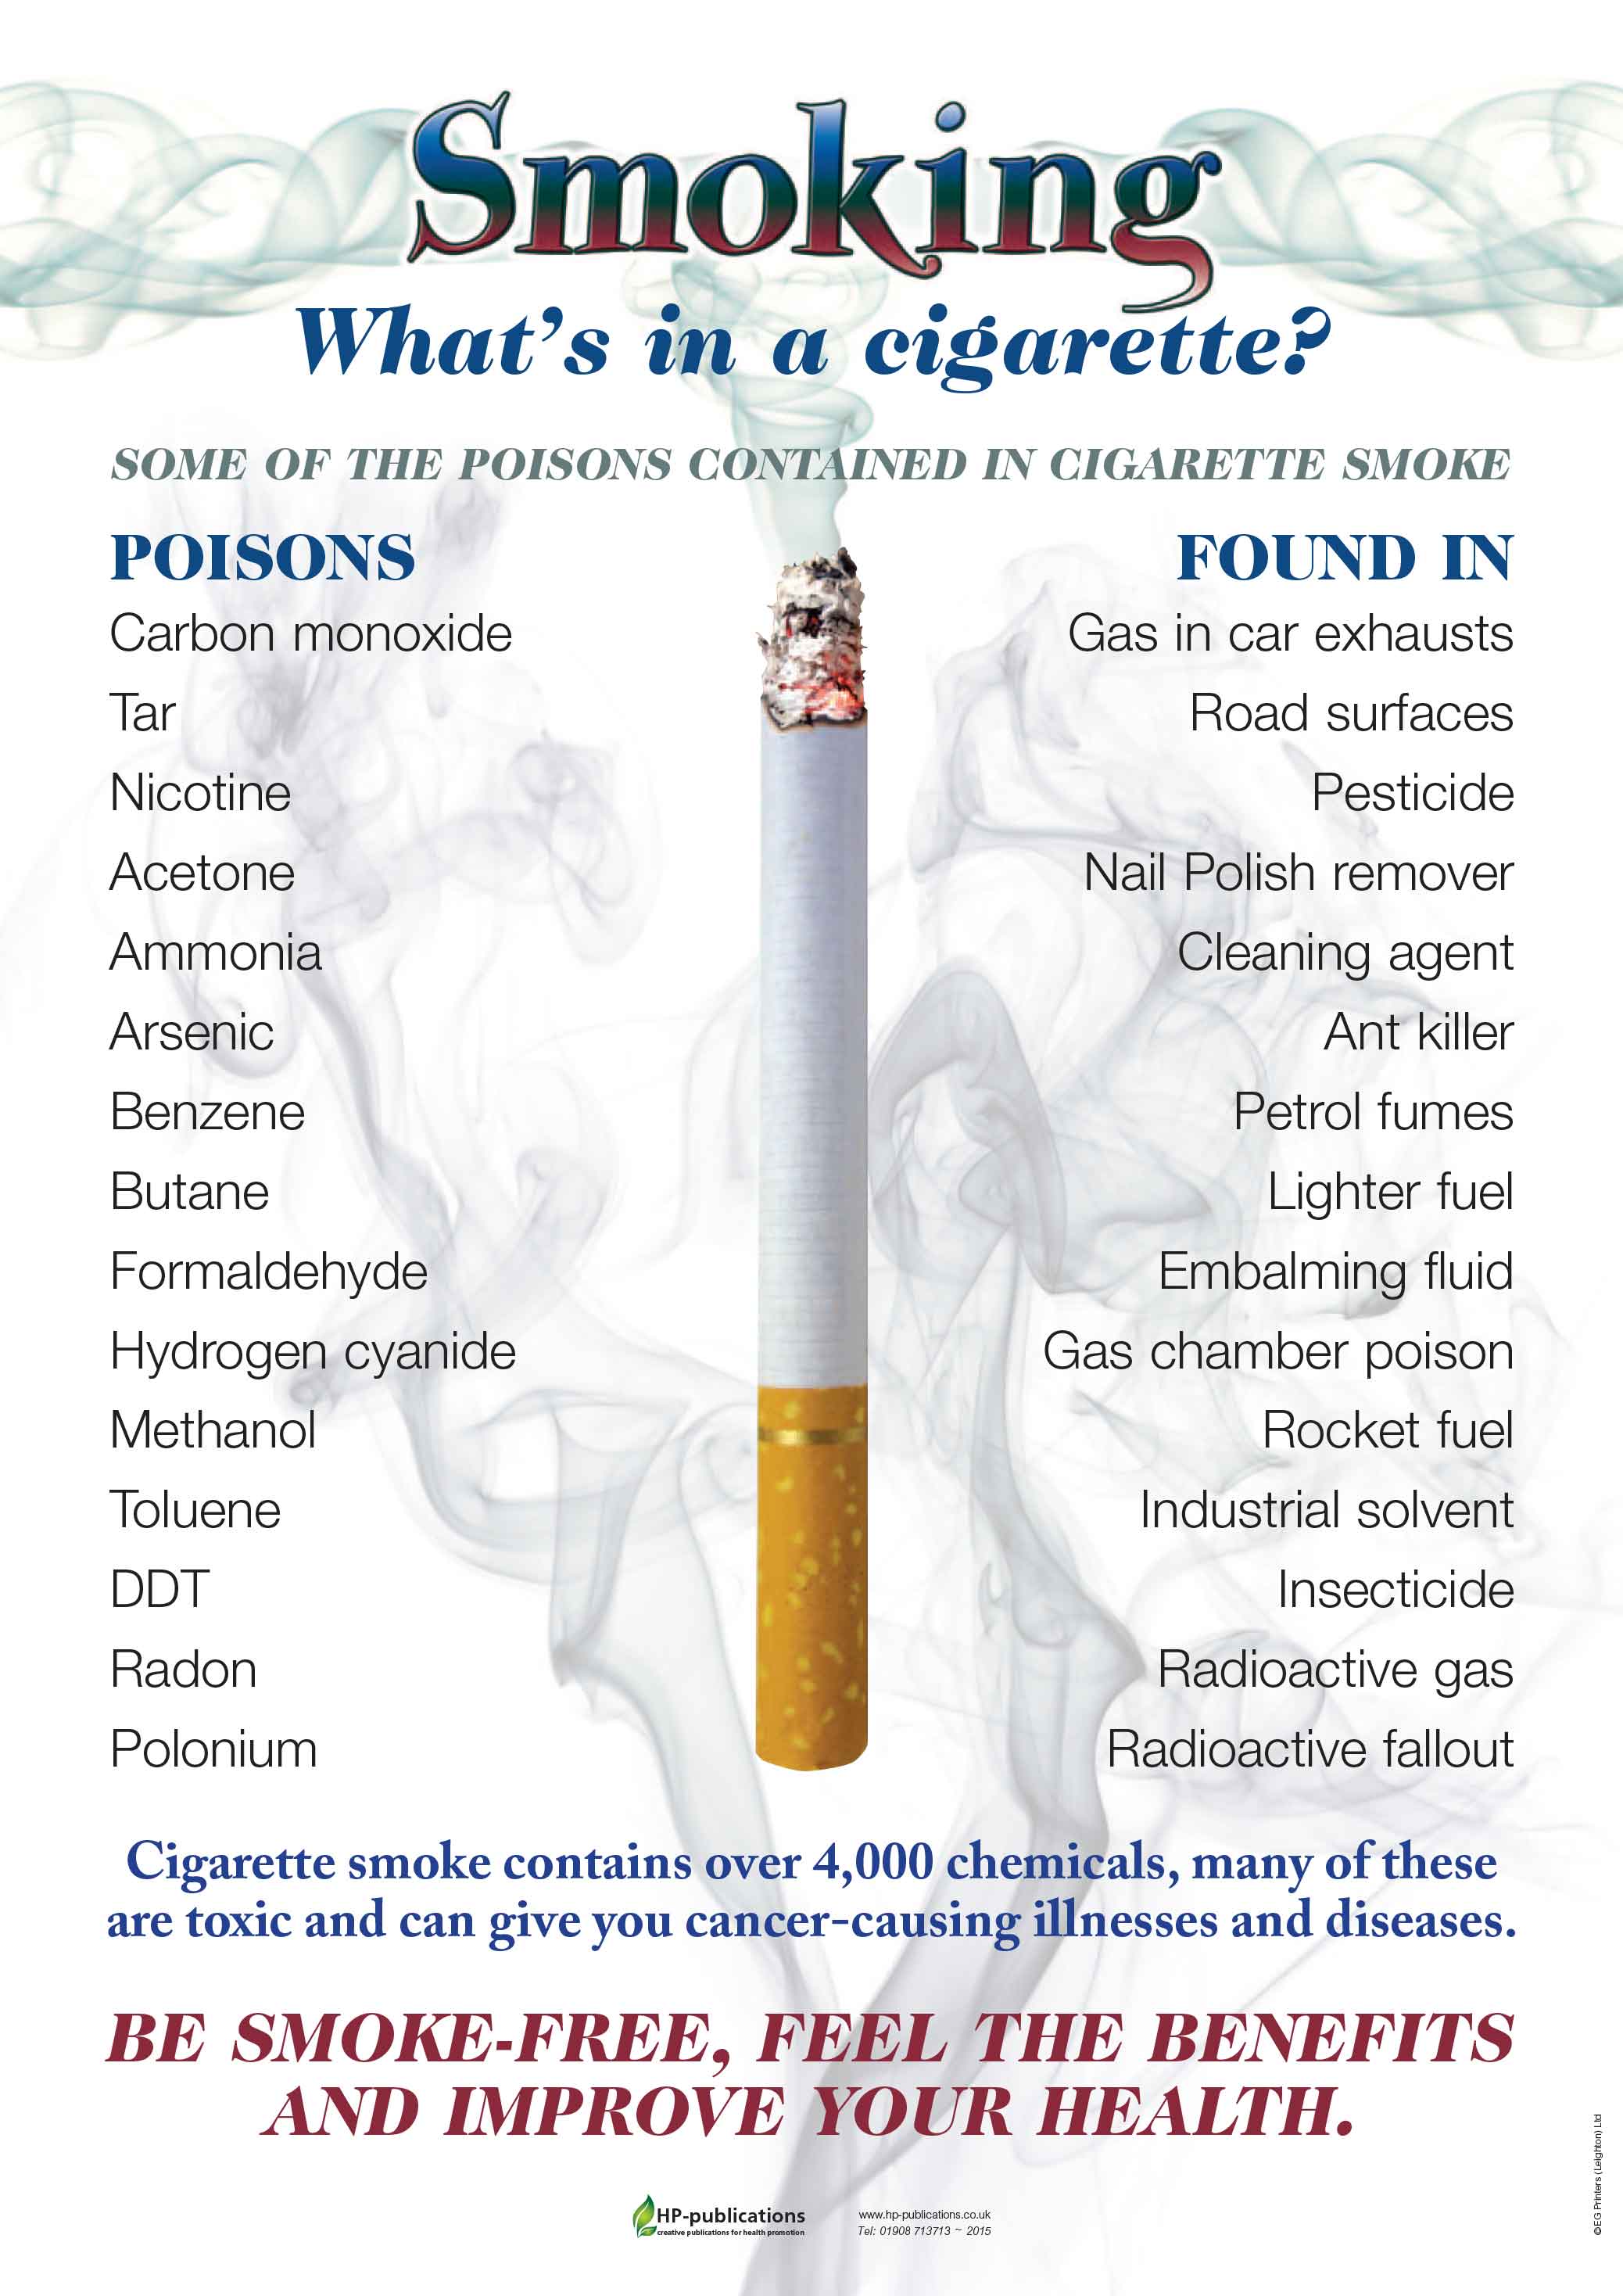 Smoking: 'what's in a cigarette?'